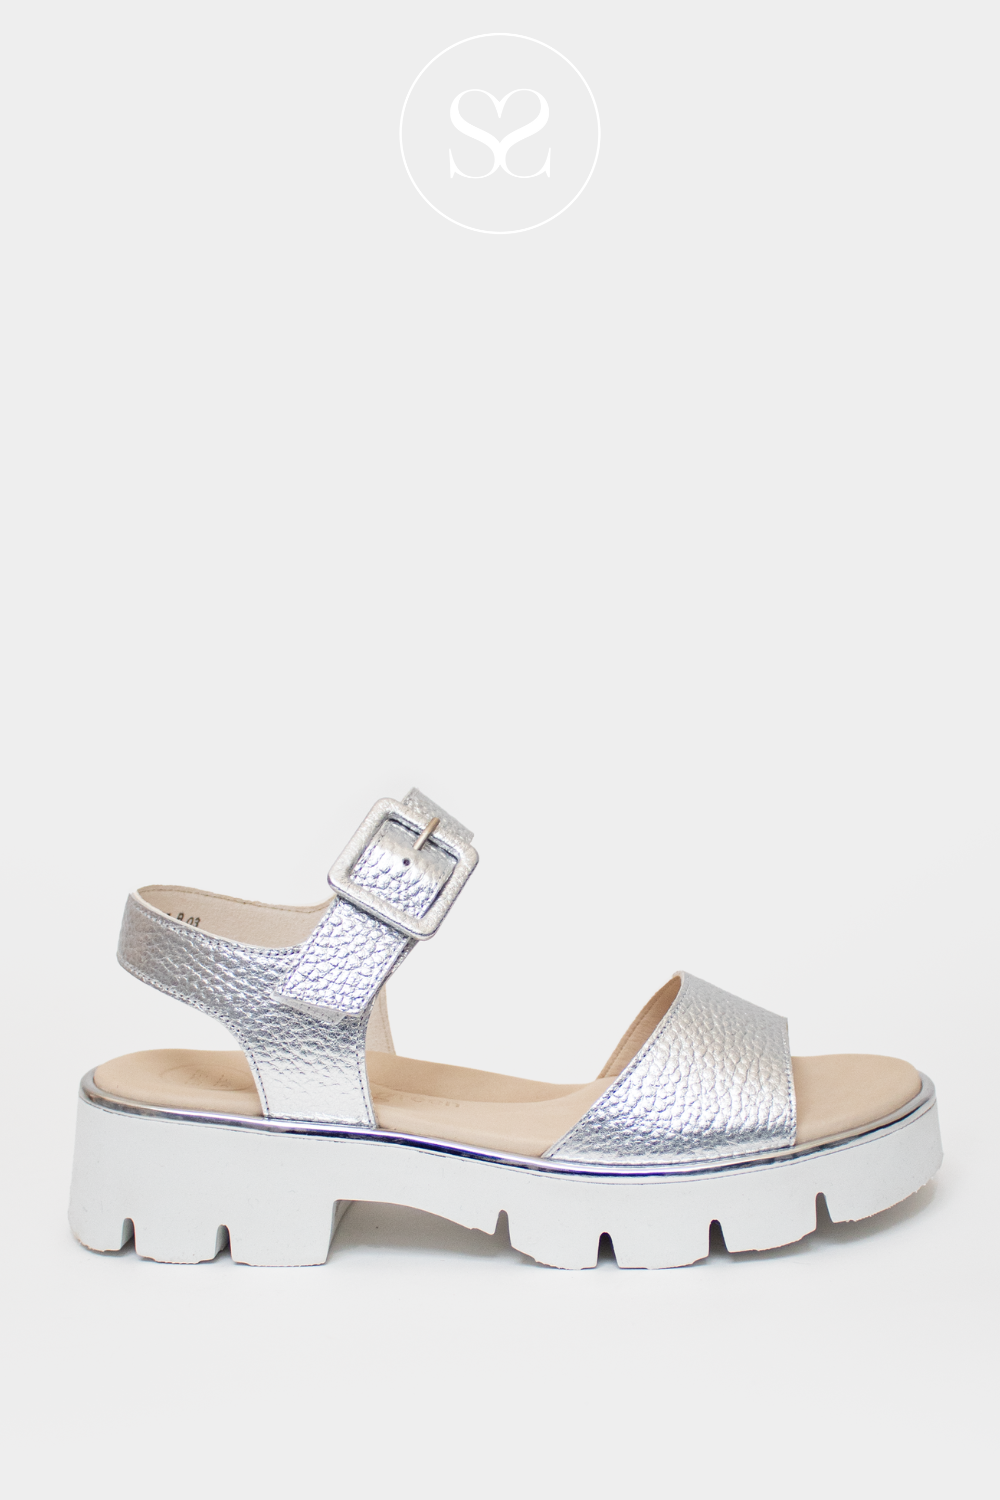 PAUL GREEN SILVER WALKING FLATFORM SOFT LEATHER SANDALS WITH ANKLE STRAP AND ADJUSTABLE STRAP